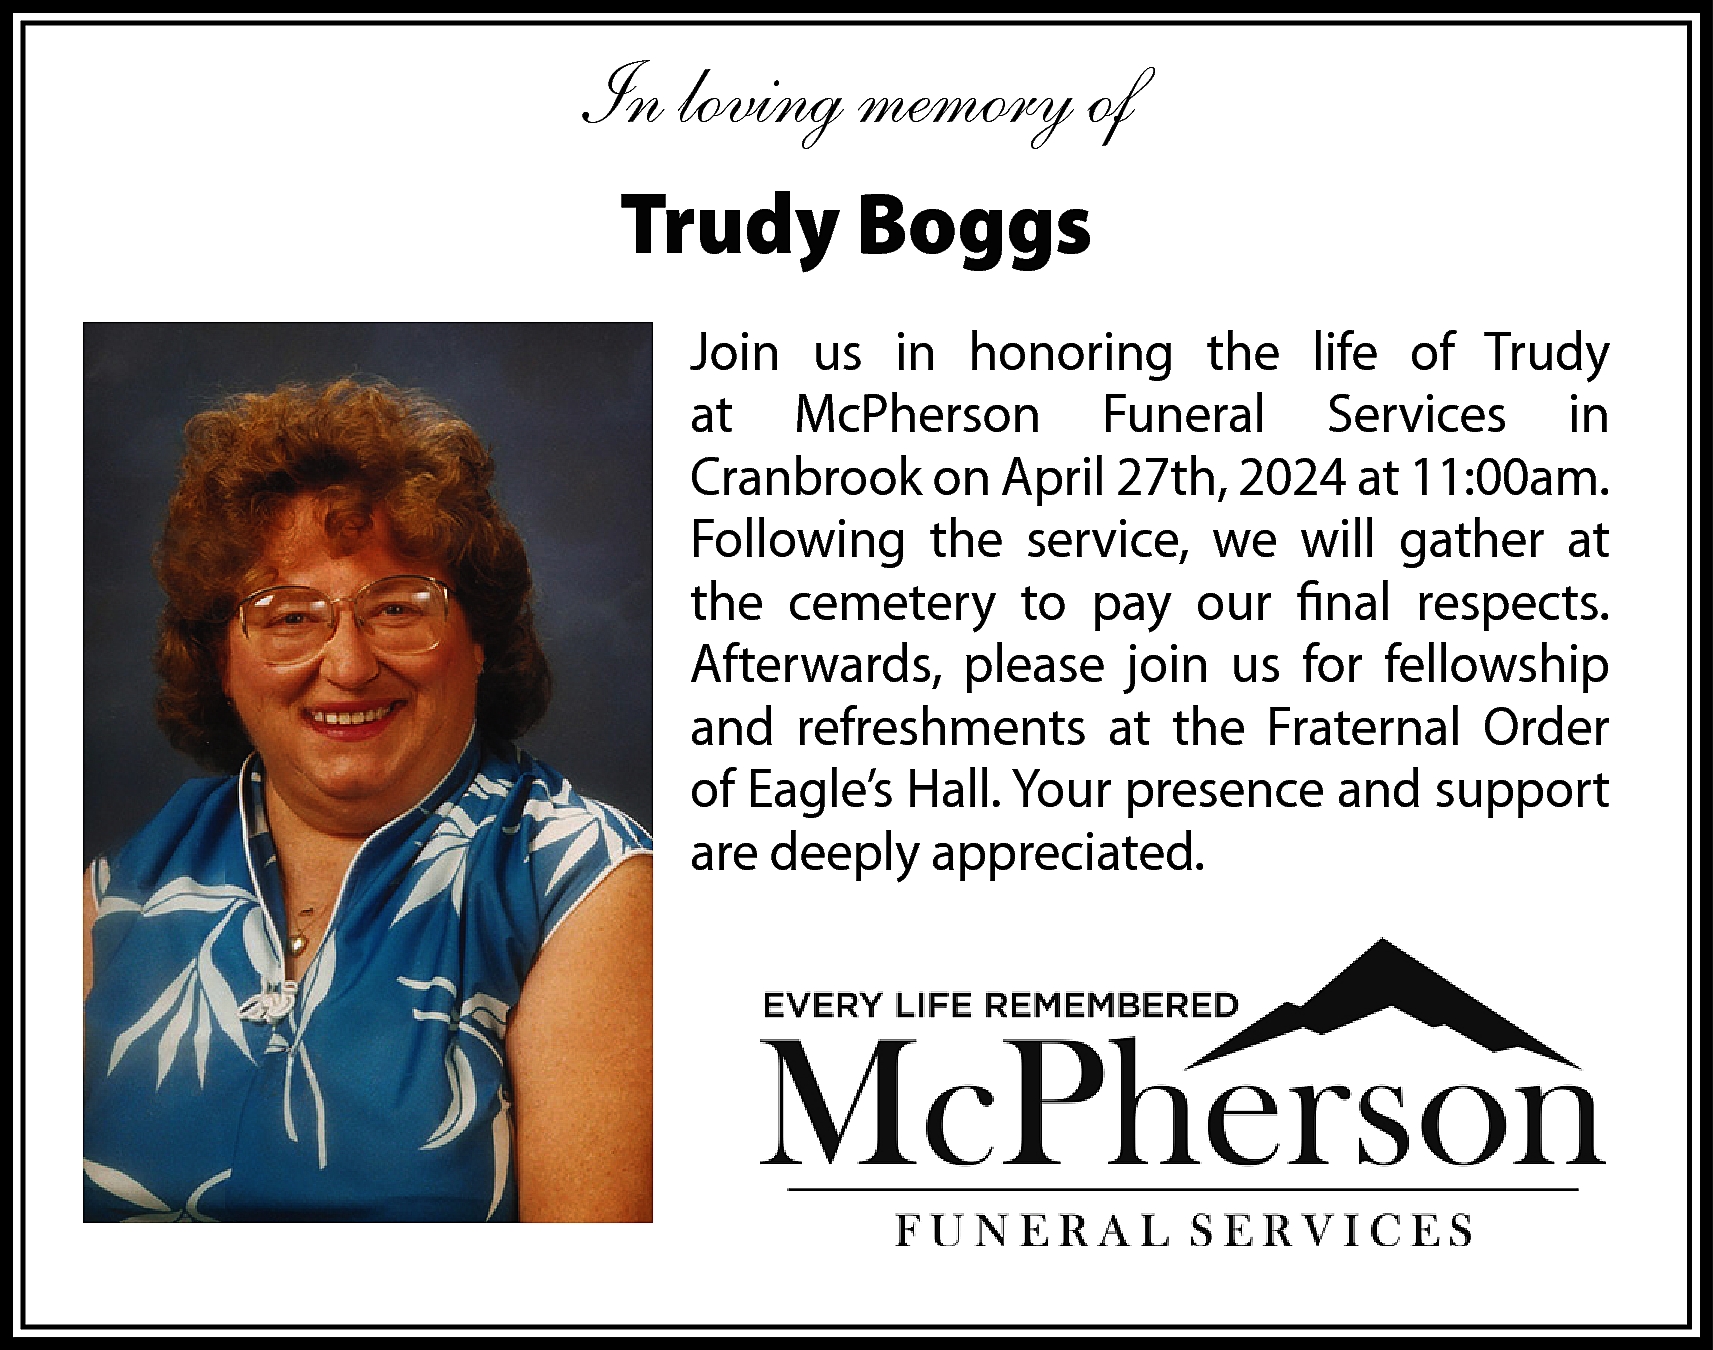 In loving memory of <br>Trudy  In loving memory of  Trudy Boggs  Join us in honoring the life of Trudy  at McPherson Funeral Services in  Cranbrook on April 27th, 2024 at 11:00am.  Following the service, we will gather at  the cemetery to pay our final respects.  Afterwards, please join us for fellowship  and refreshments at the Fraternal Order  of Eagle’s Hall. Your presence and support  are deeply appreciated.    